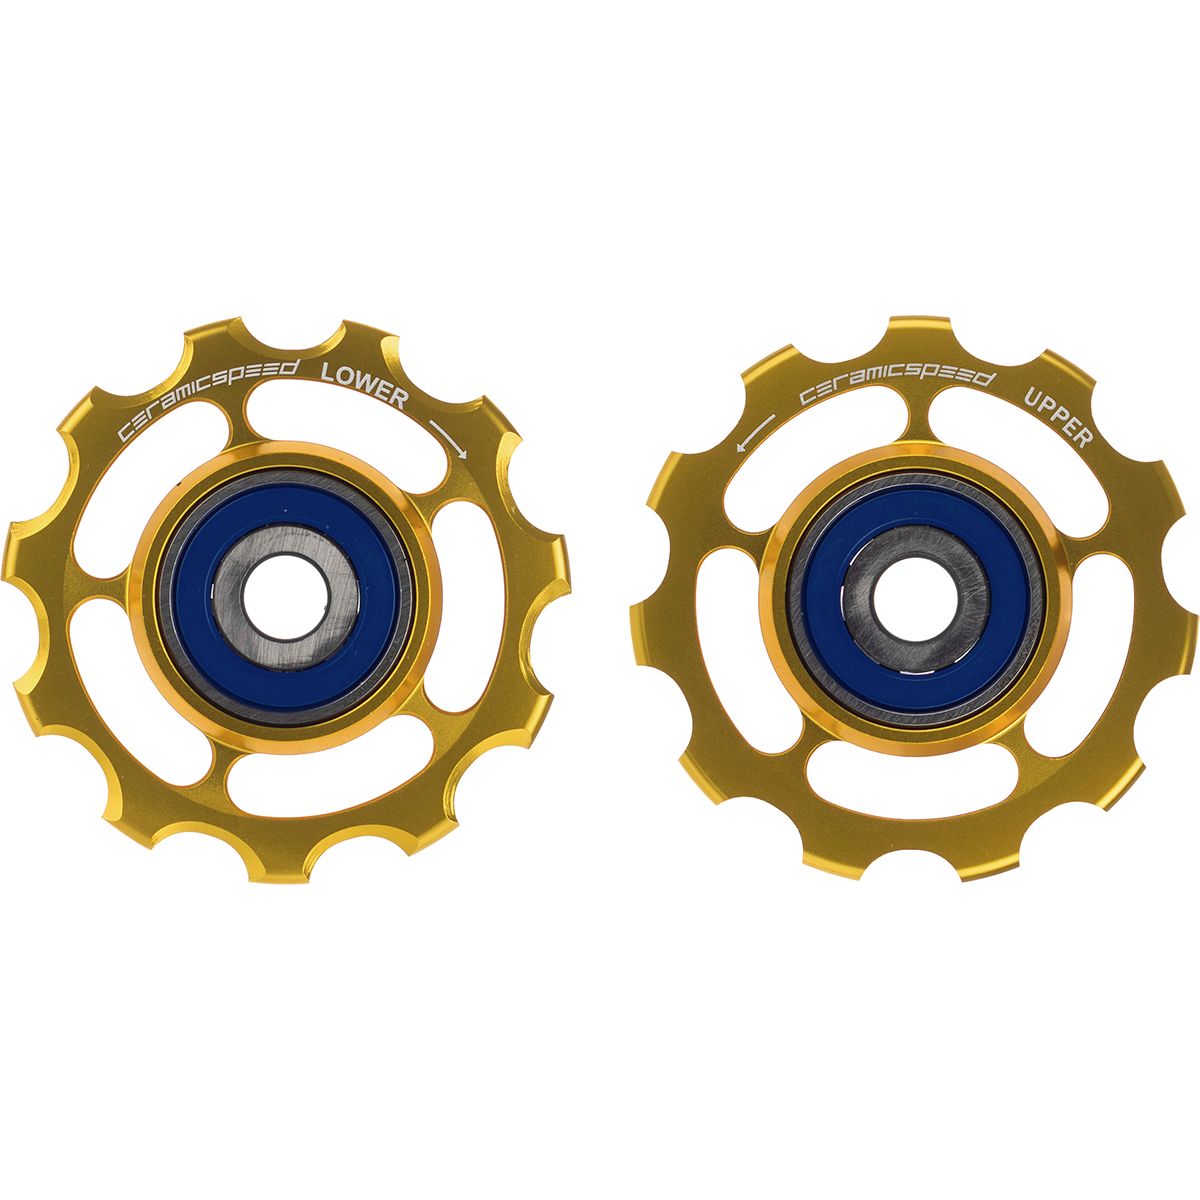 CeramicSpeed 11 Speed Aluminum Pulley Wheels - Limited Edition Gold